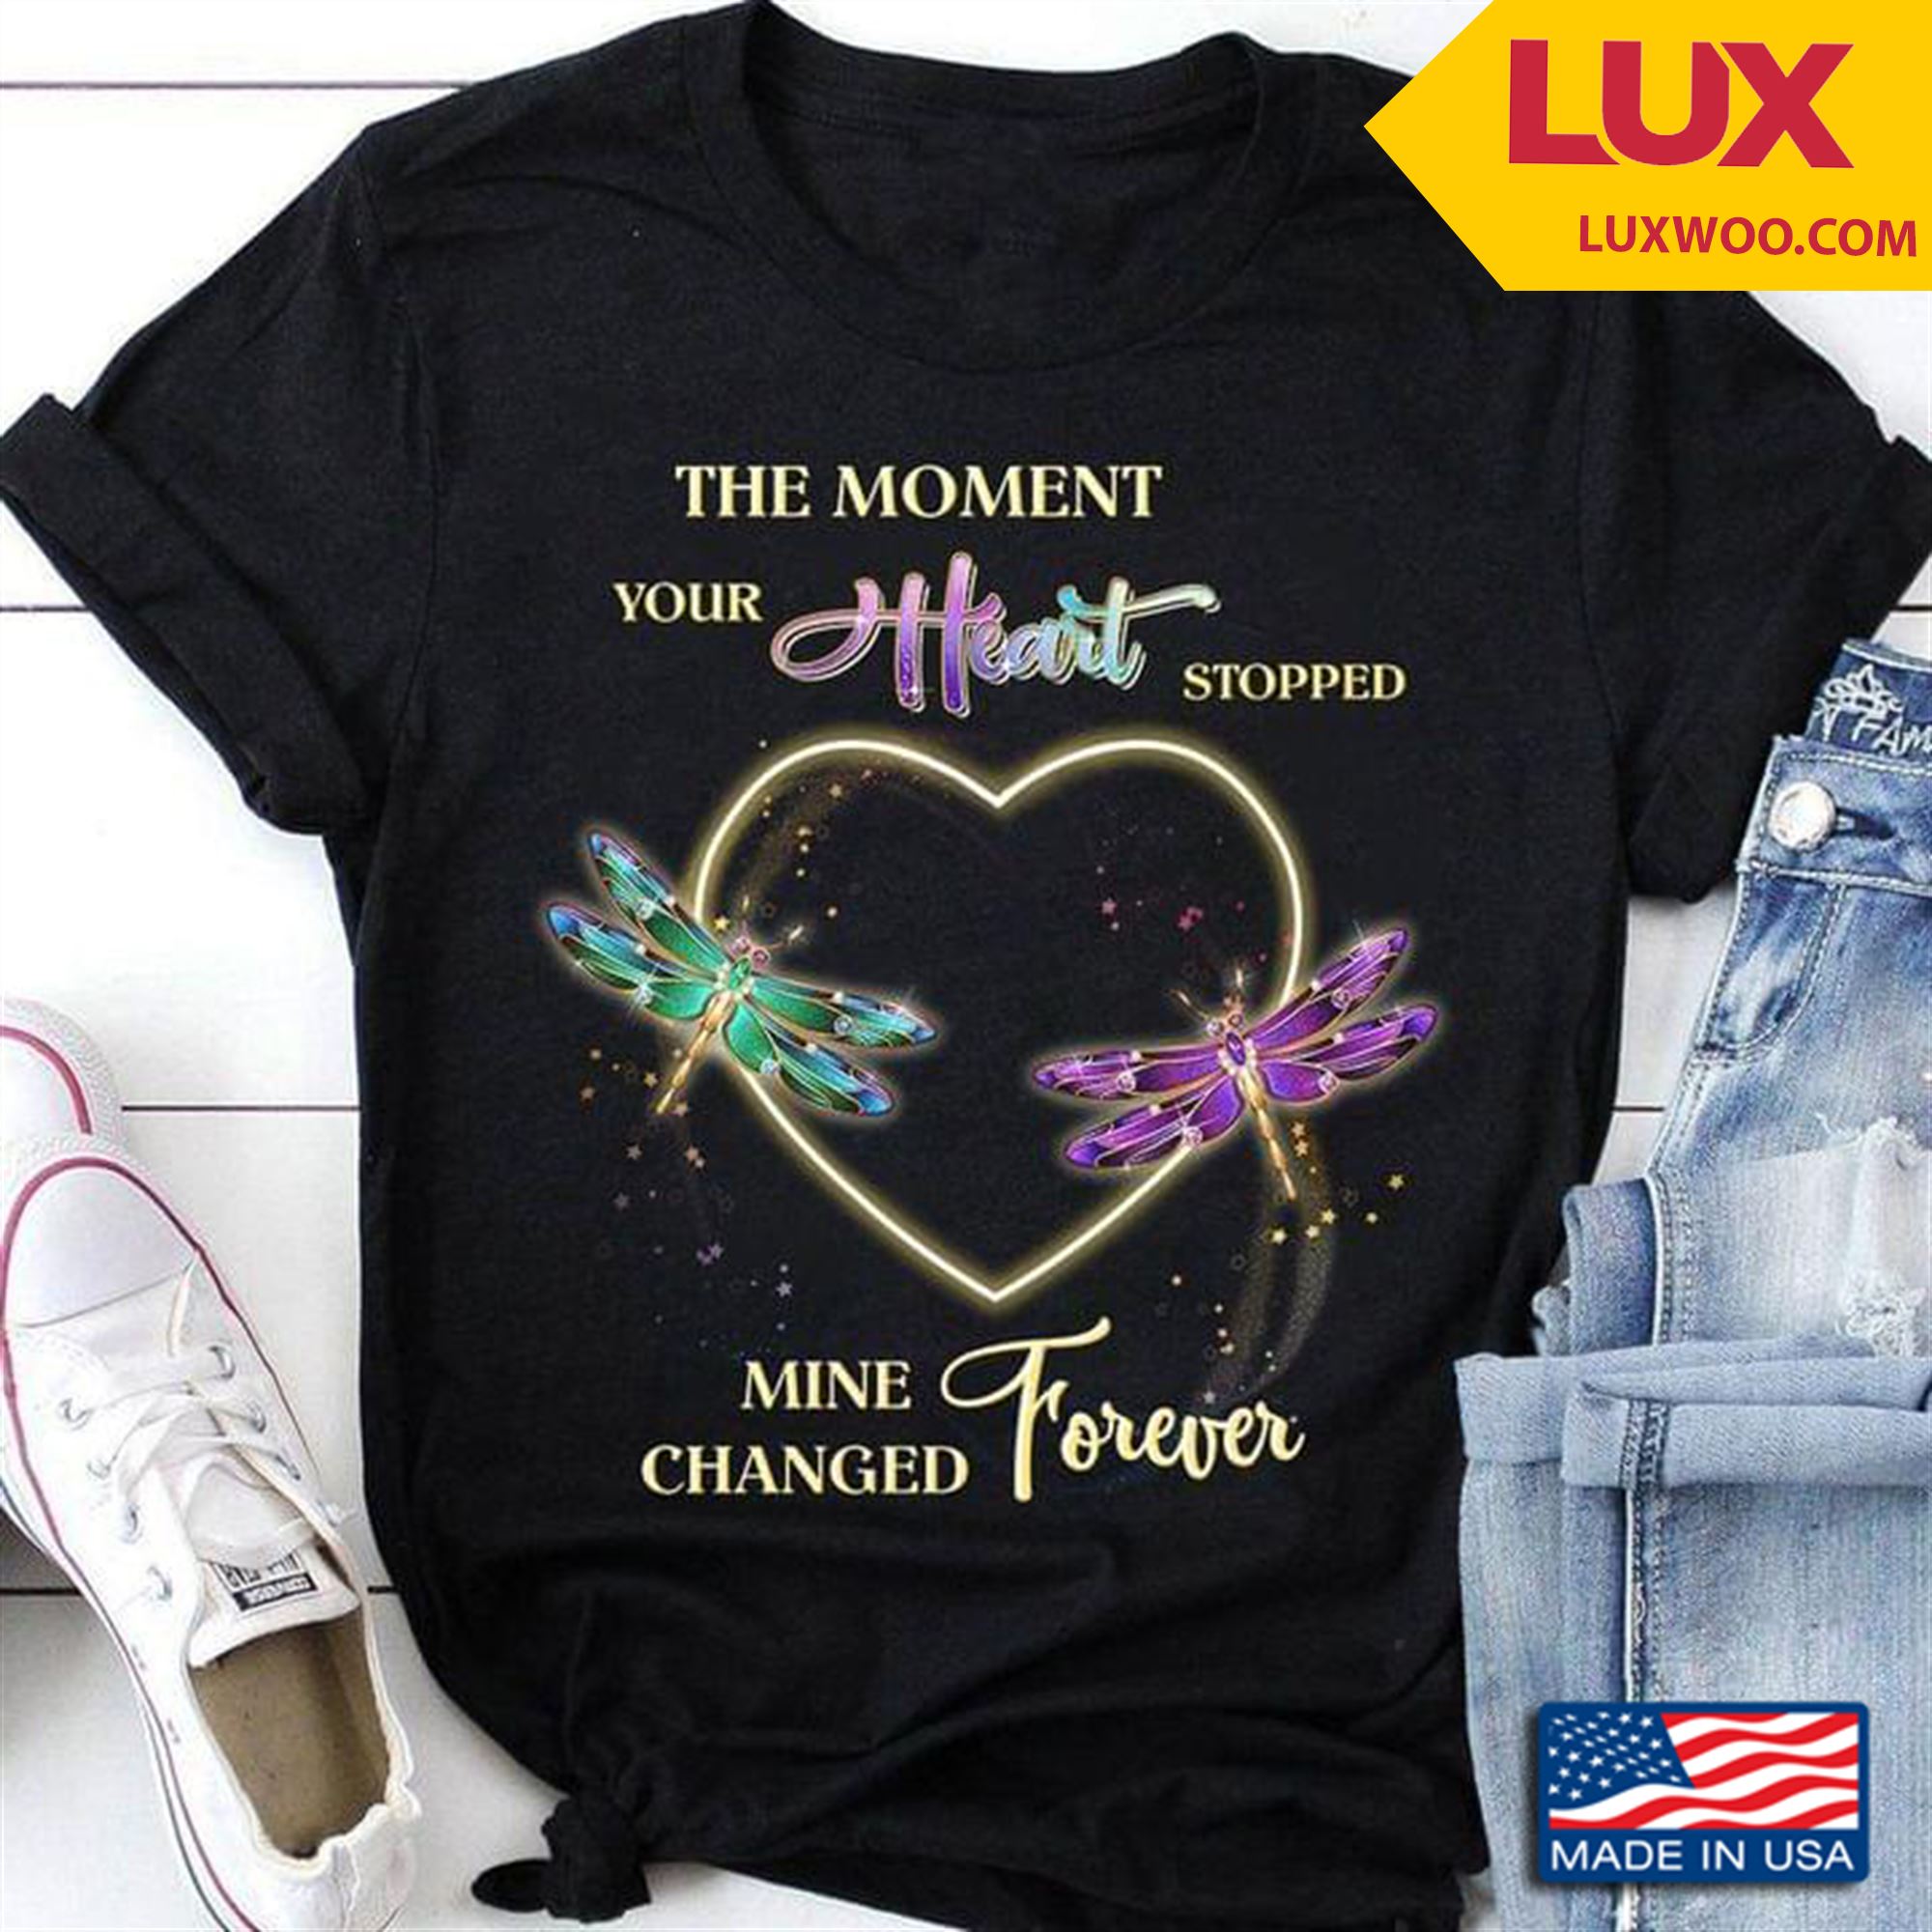 The Moment Your Heart Stopped Mine Changed Forever Shirt Plus Size Up To 5xl